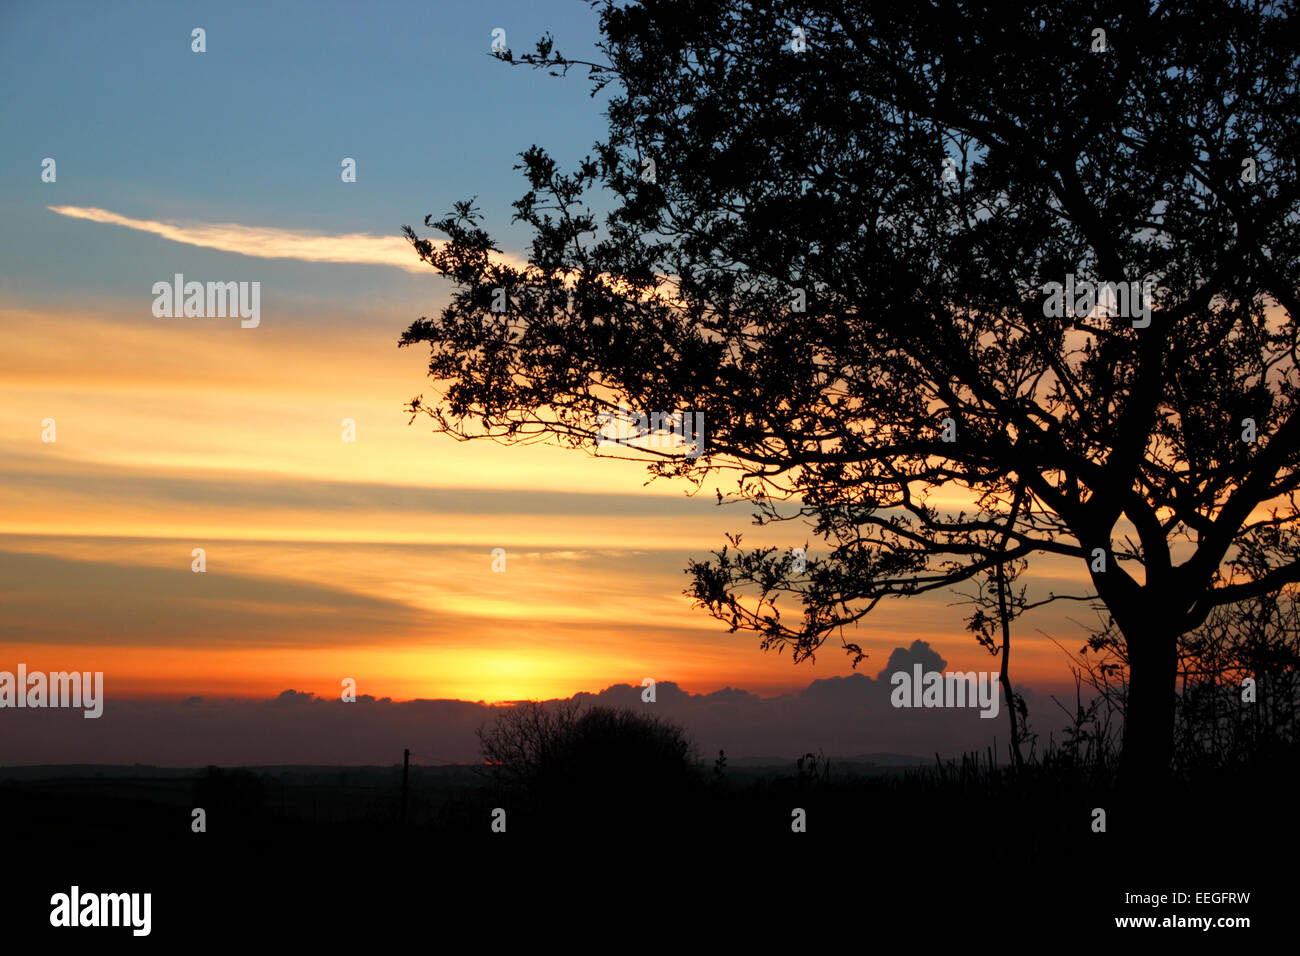 A winter sunset with a tree silhouetted in the foreground. Stock Photo